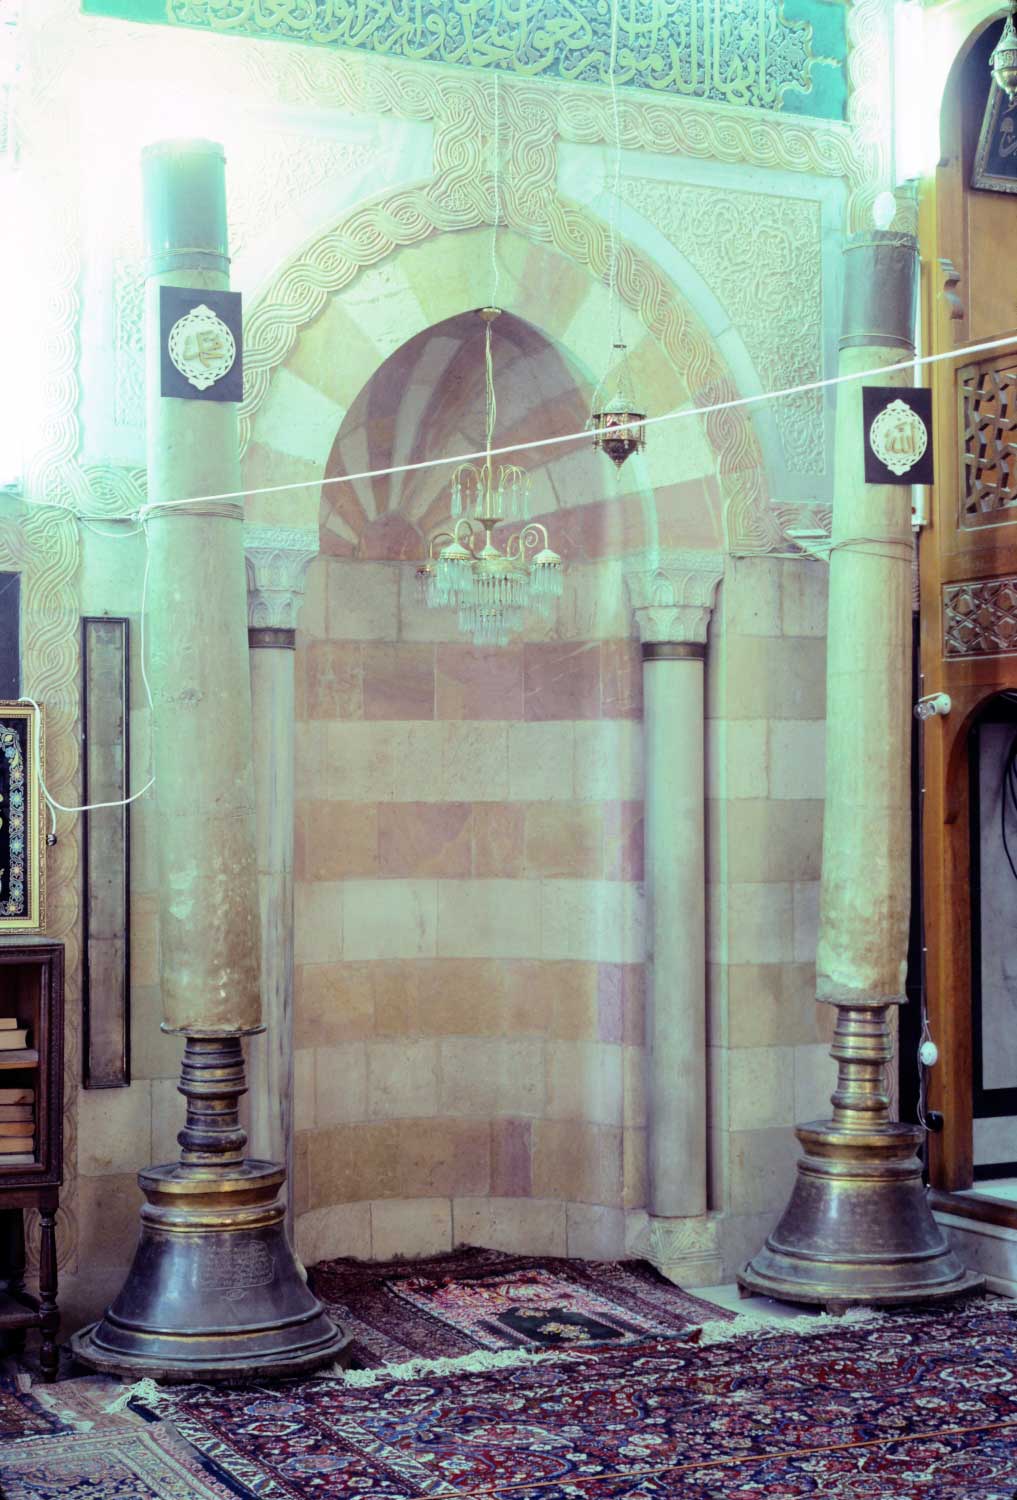 Detail of the mihrab